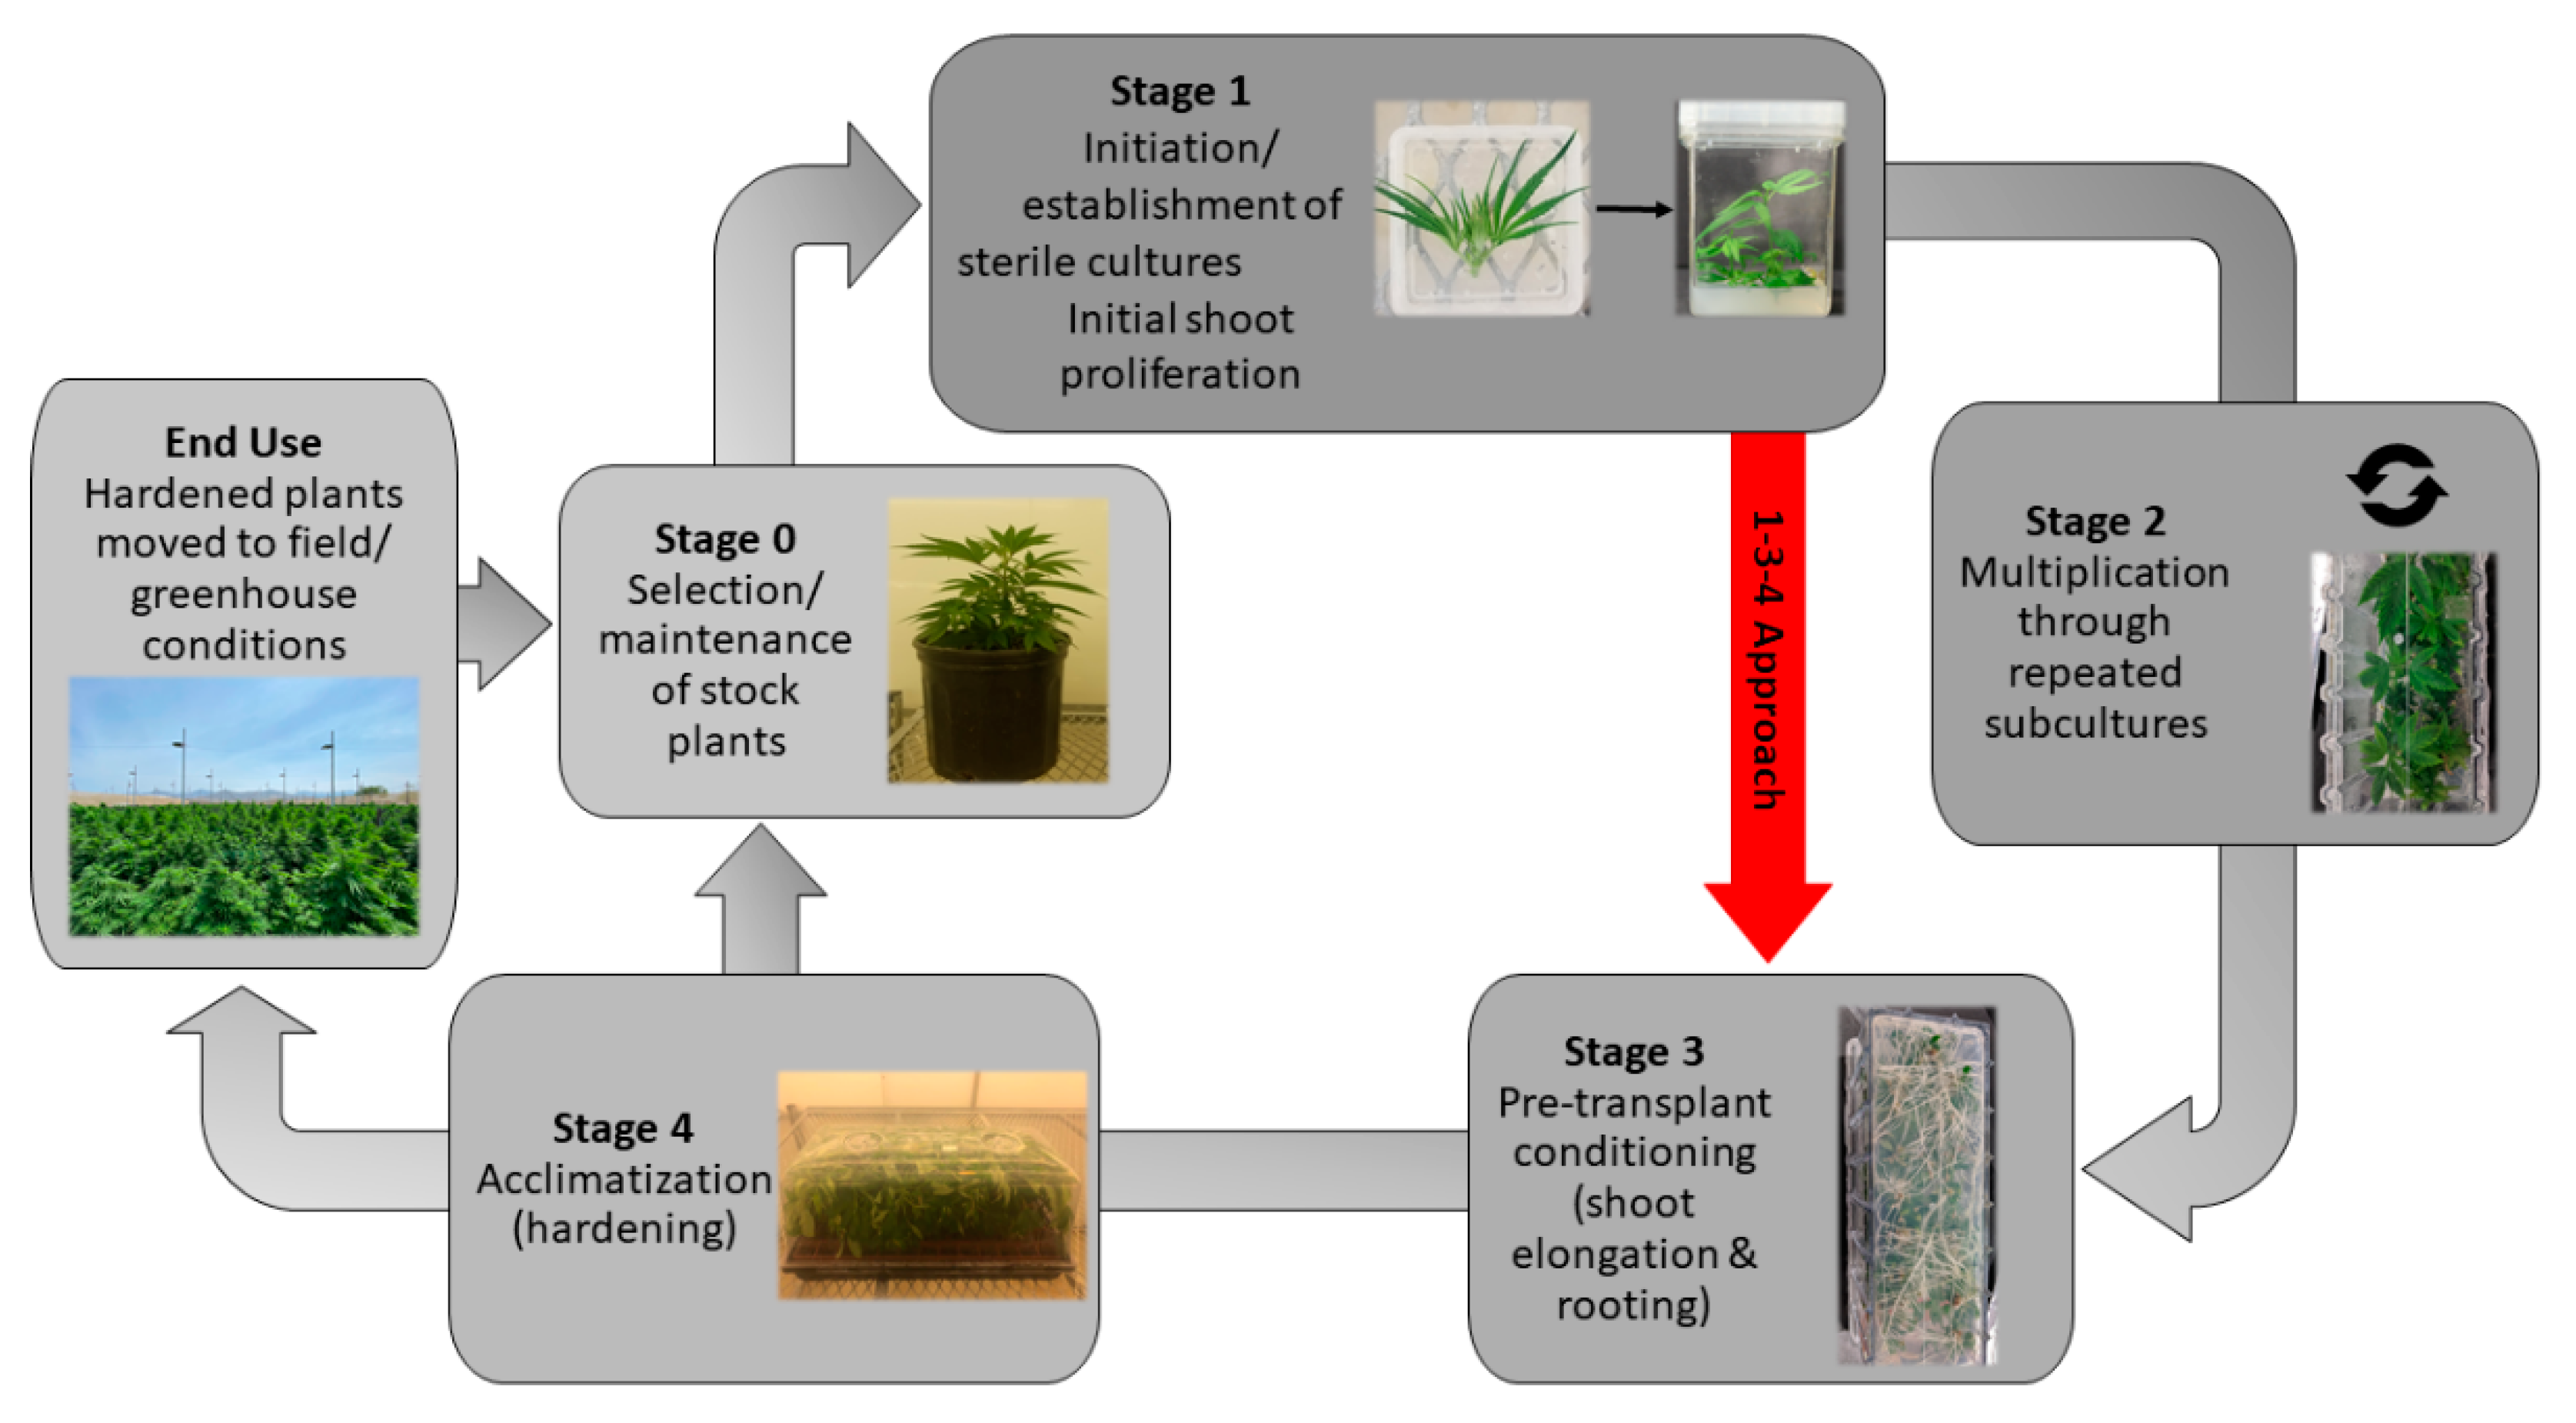 Weed-Inspired Velcro Concept Could Deliver Medicines, Collect Data From  Plants - Modern Farmer